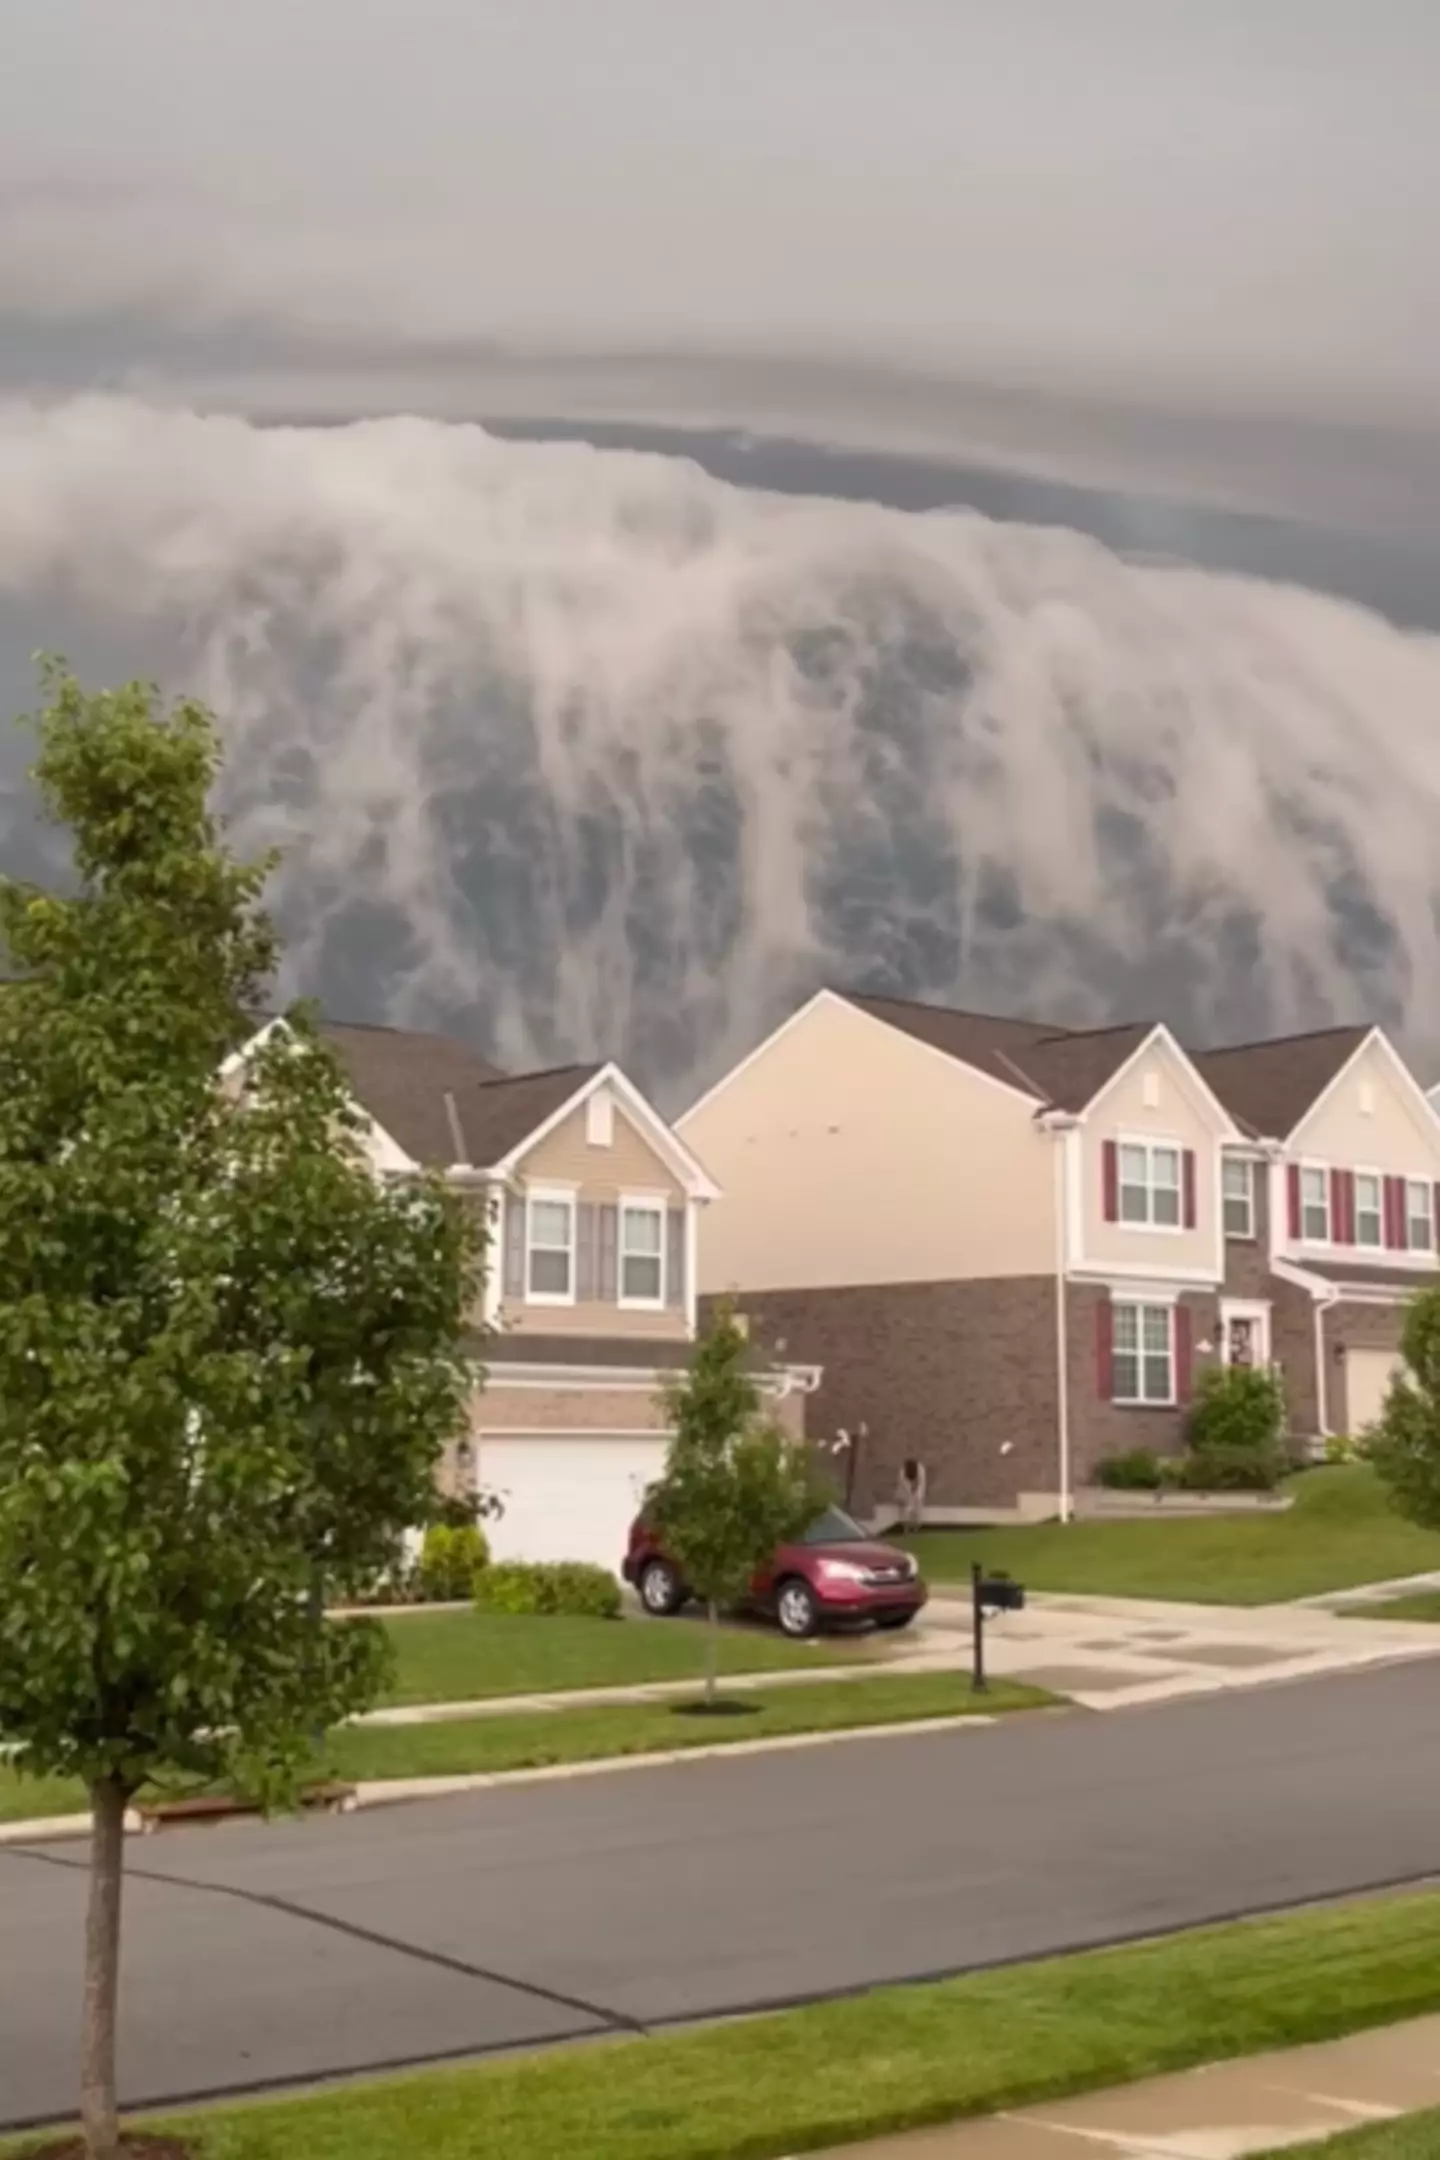 People have been left baffled by the sight of the cloud formation.